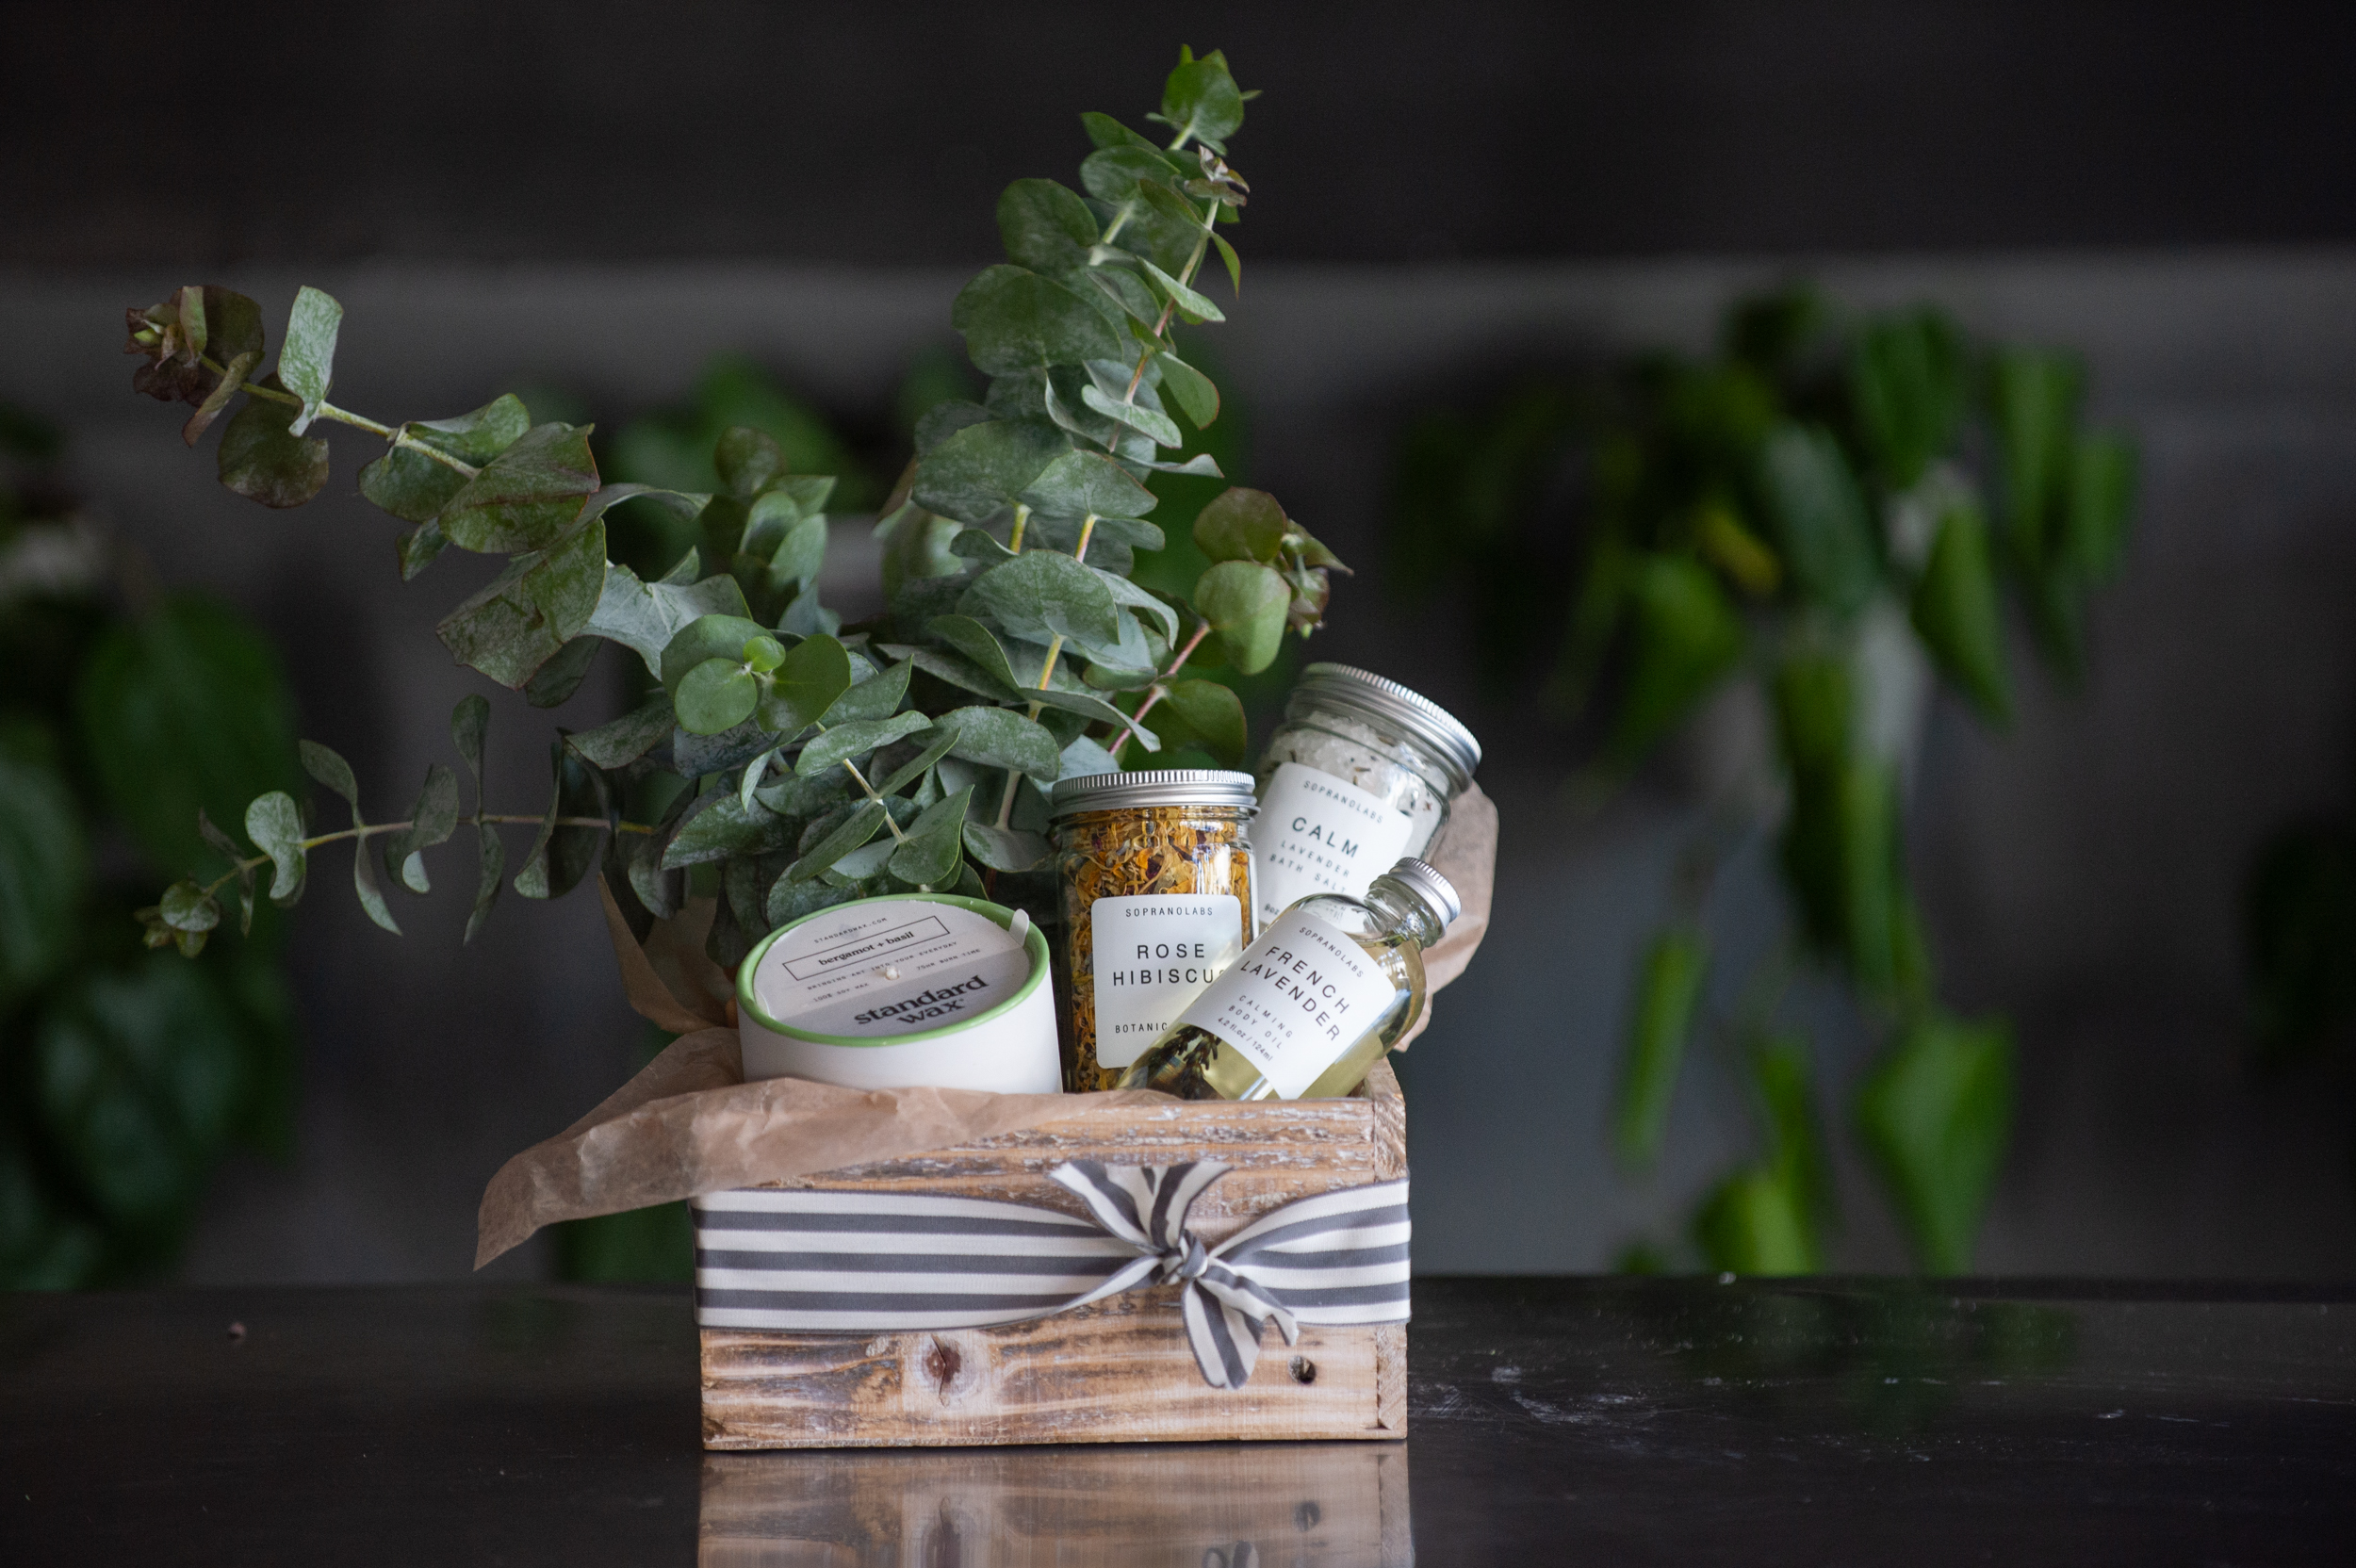 Gift sets with small batch products and fresh flowers or plants